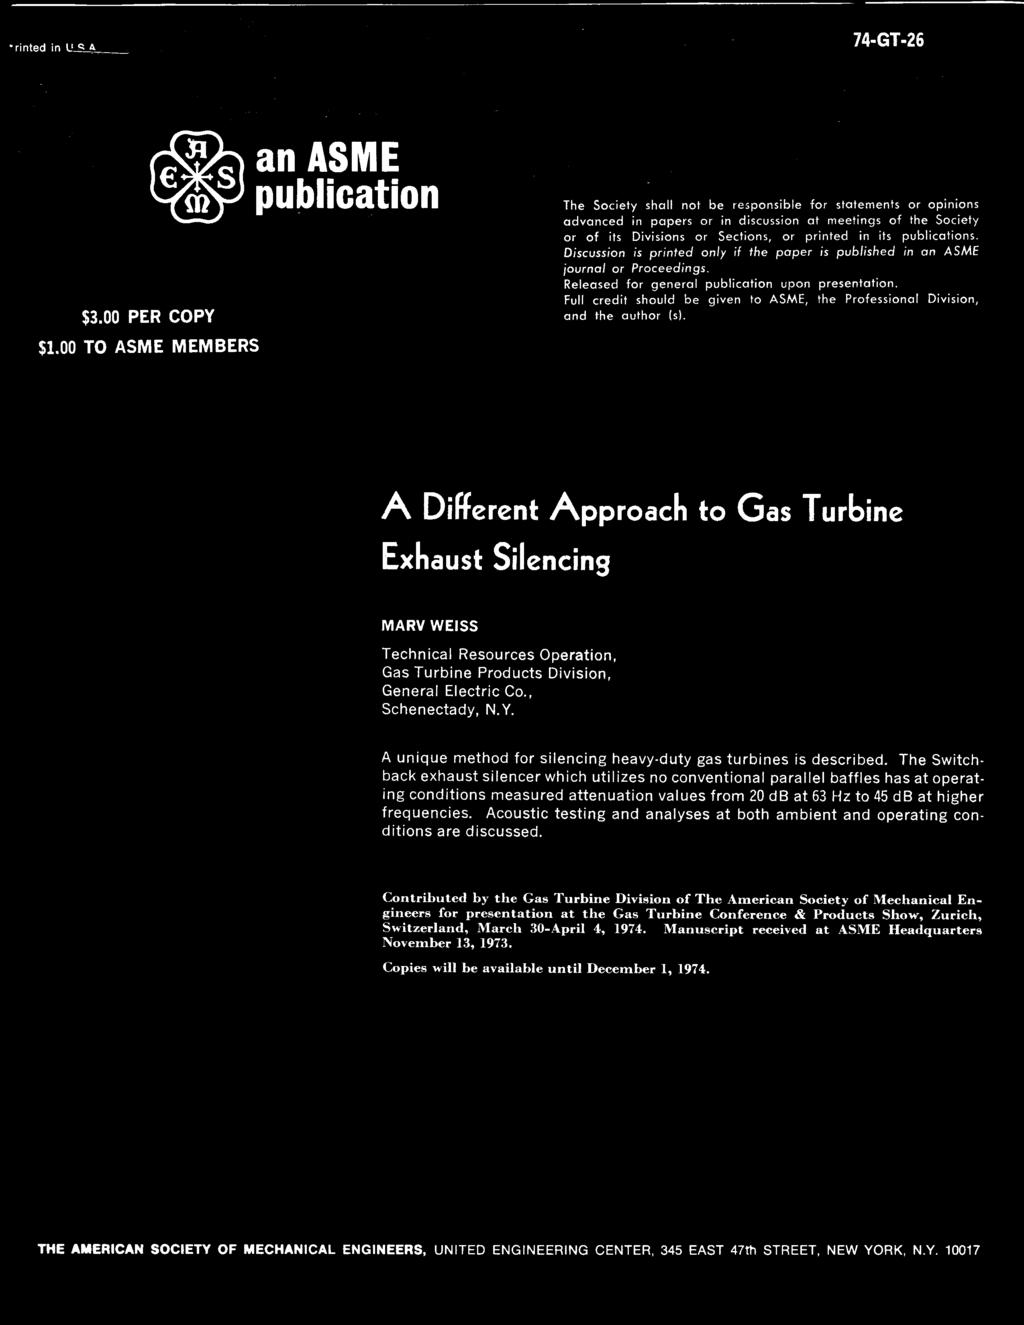 A Different Approach to Gas Turbine Exhaust Silencing MARV WEISS Technical Resources Operation, Gas Turbine Products Division, General Electric Co., Schenectady, N.Y.